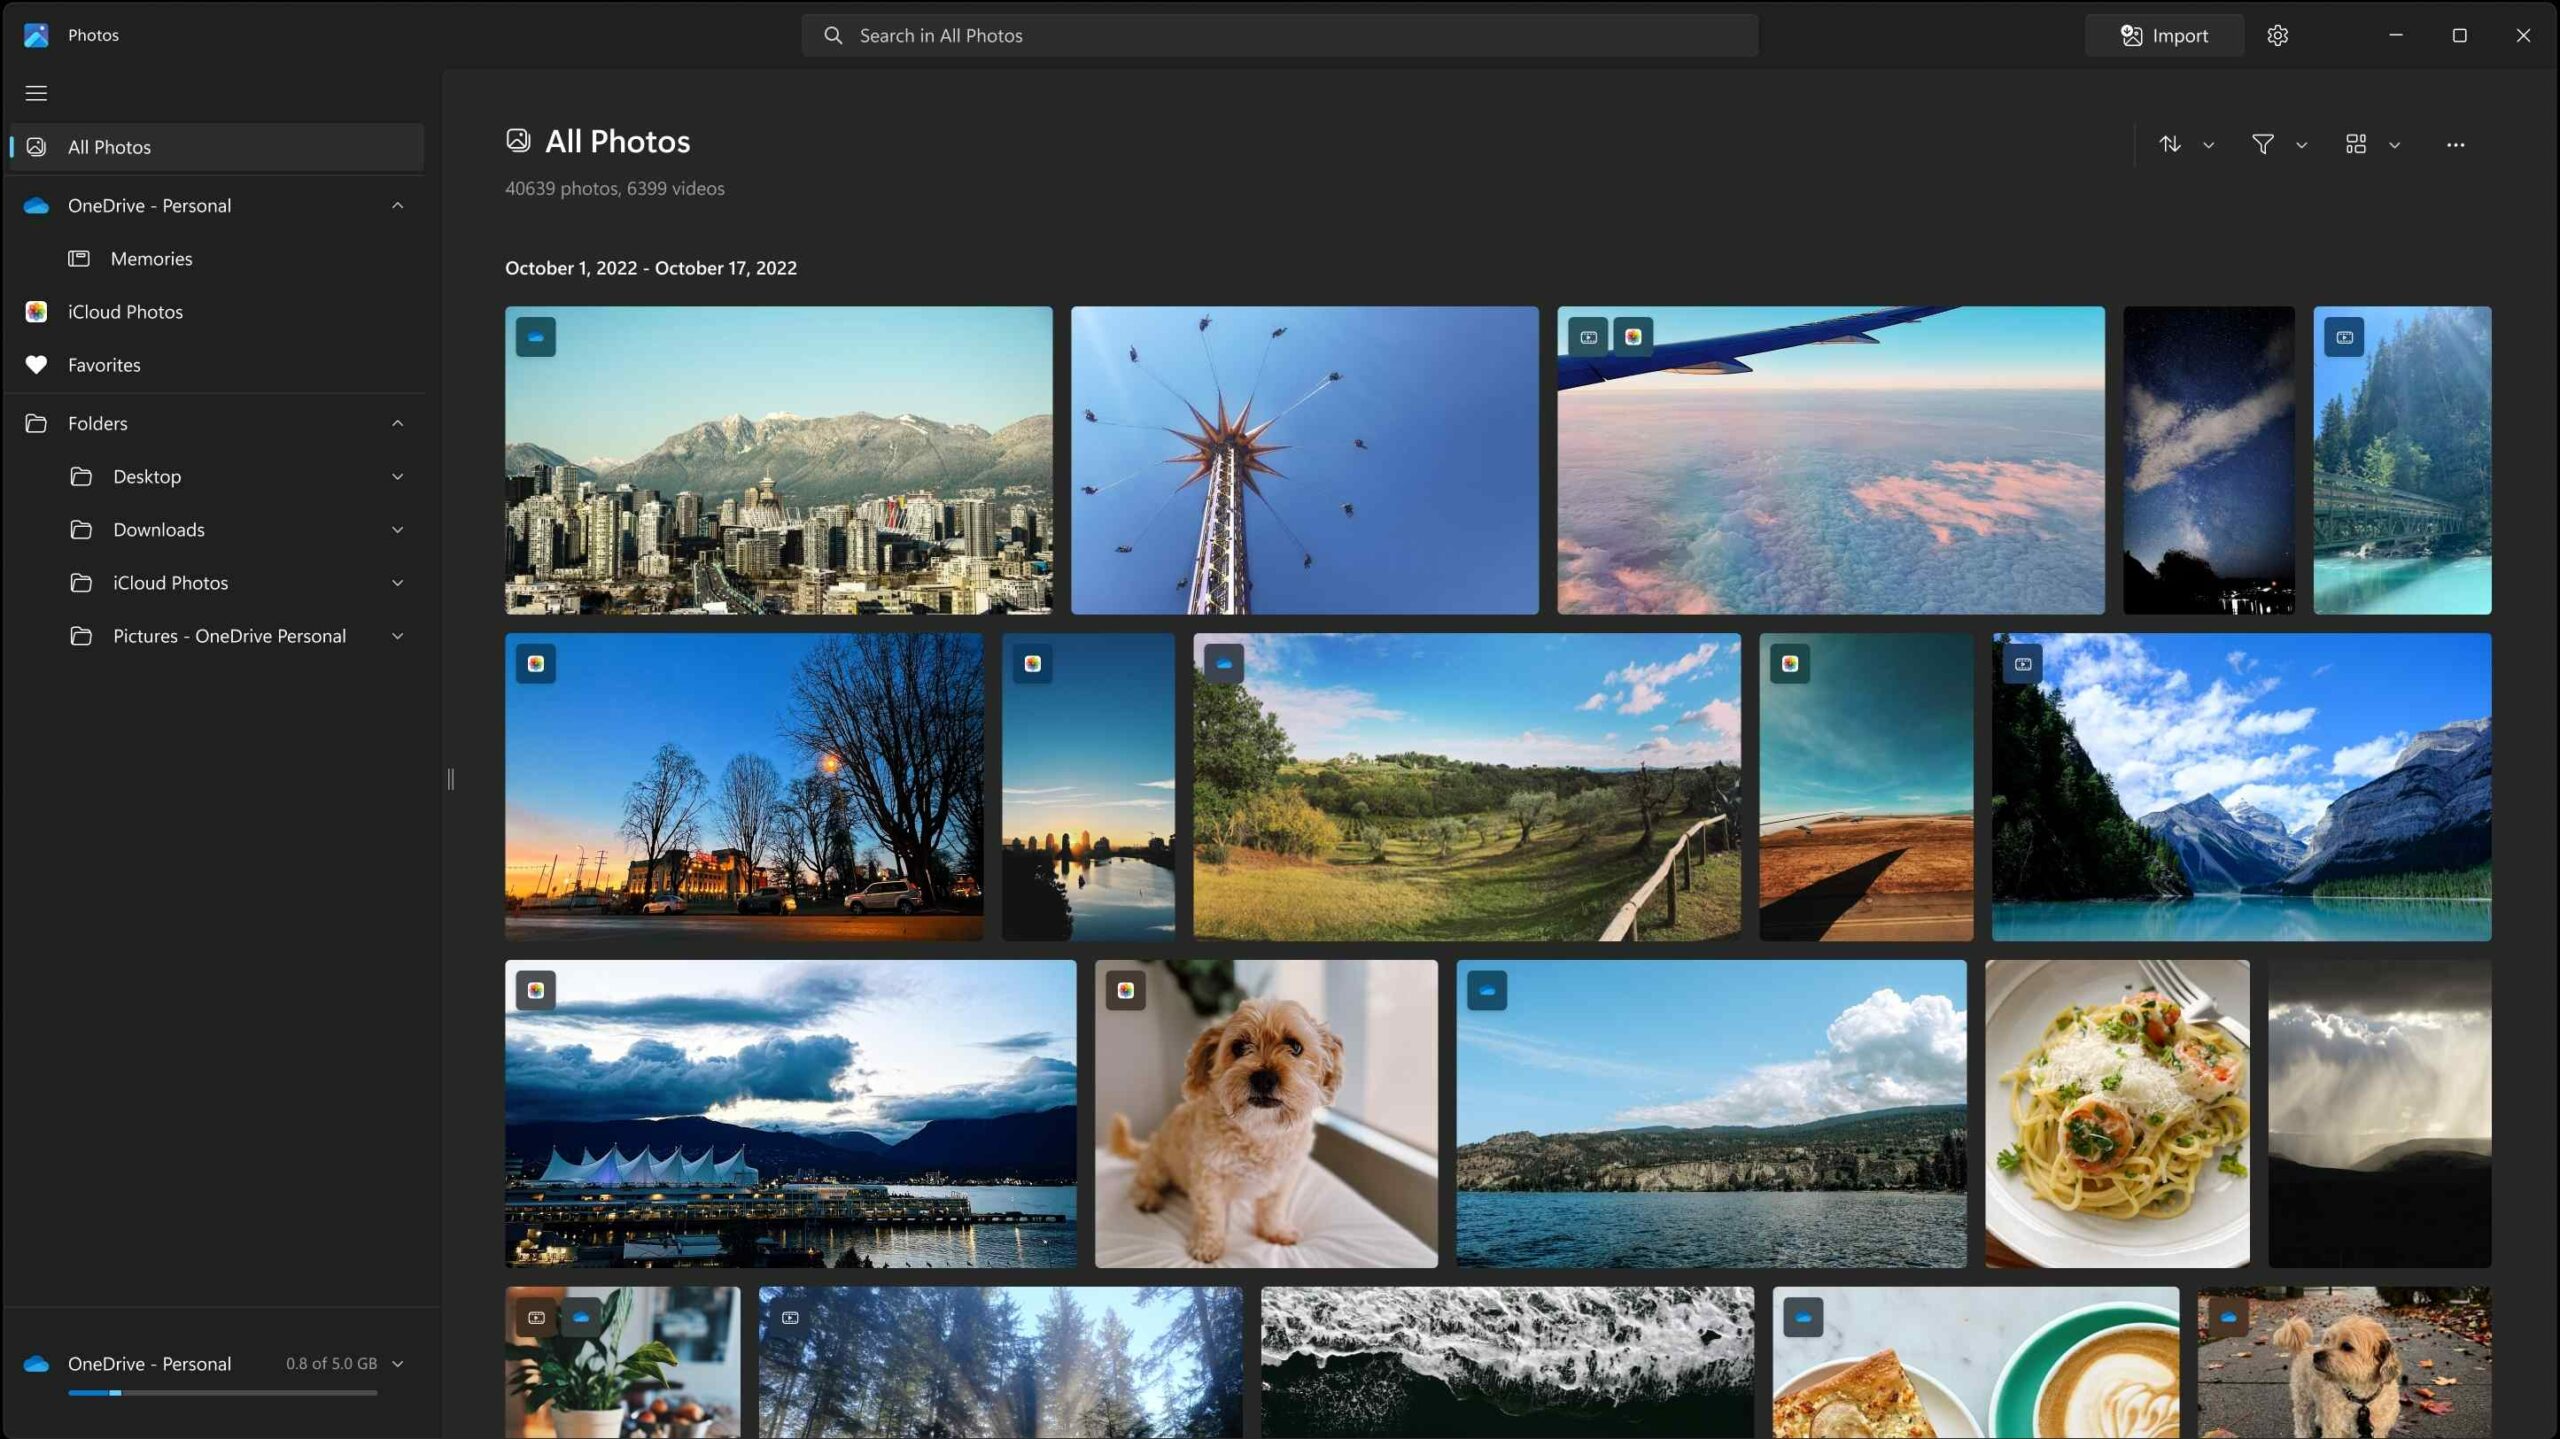 The Windows Photos app is a built-in photo and video editor with Windows 10.